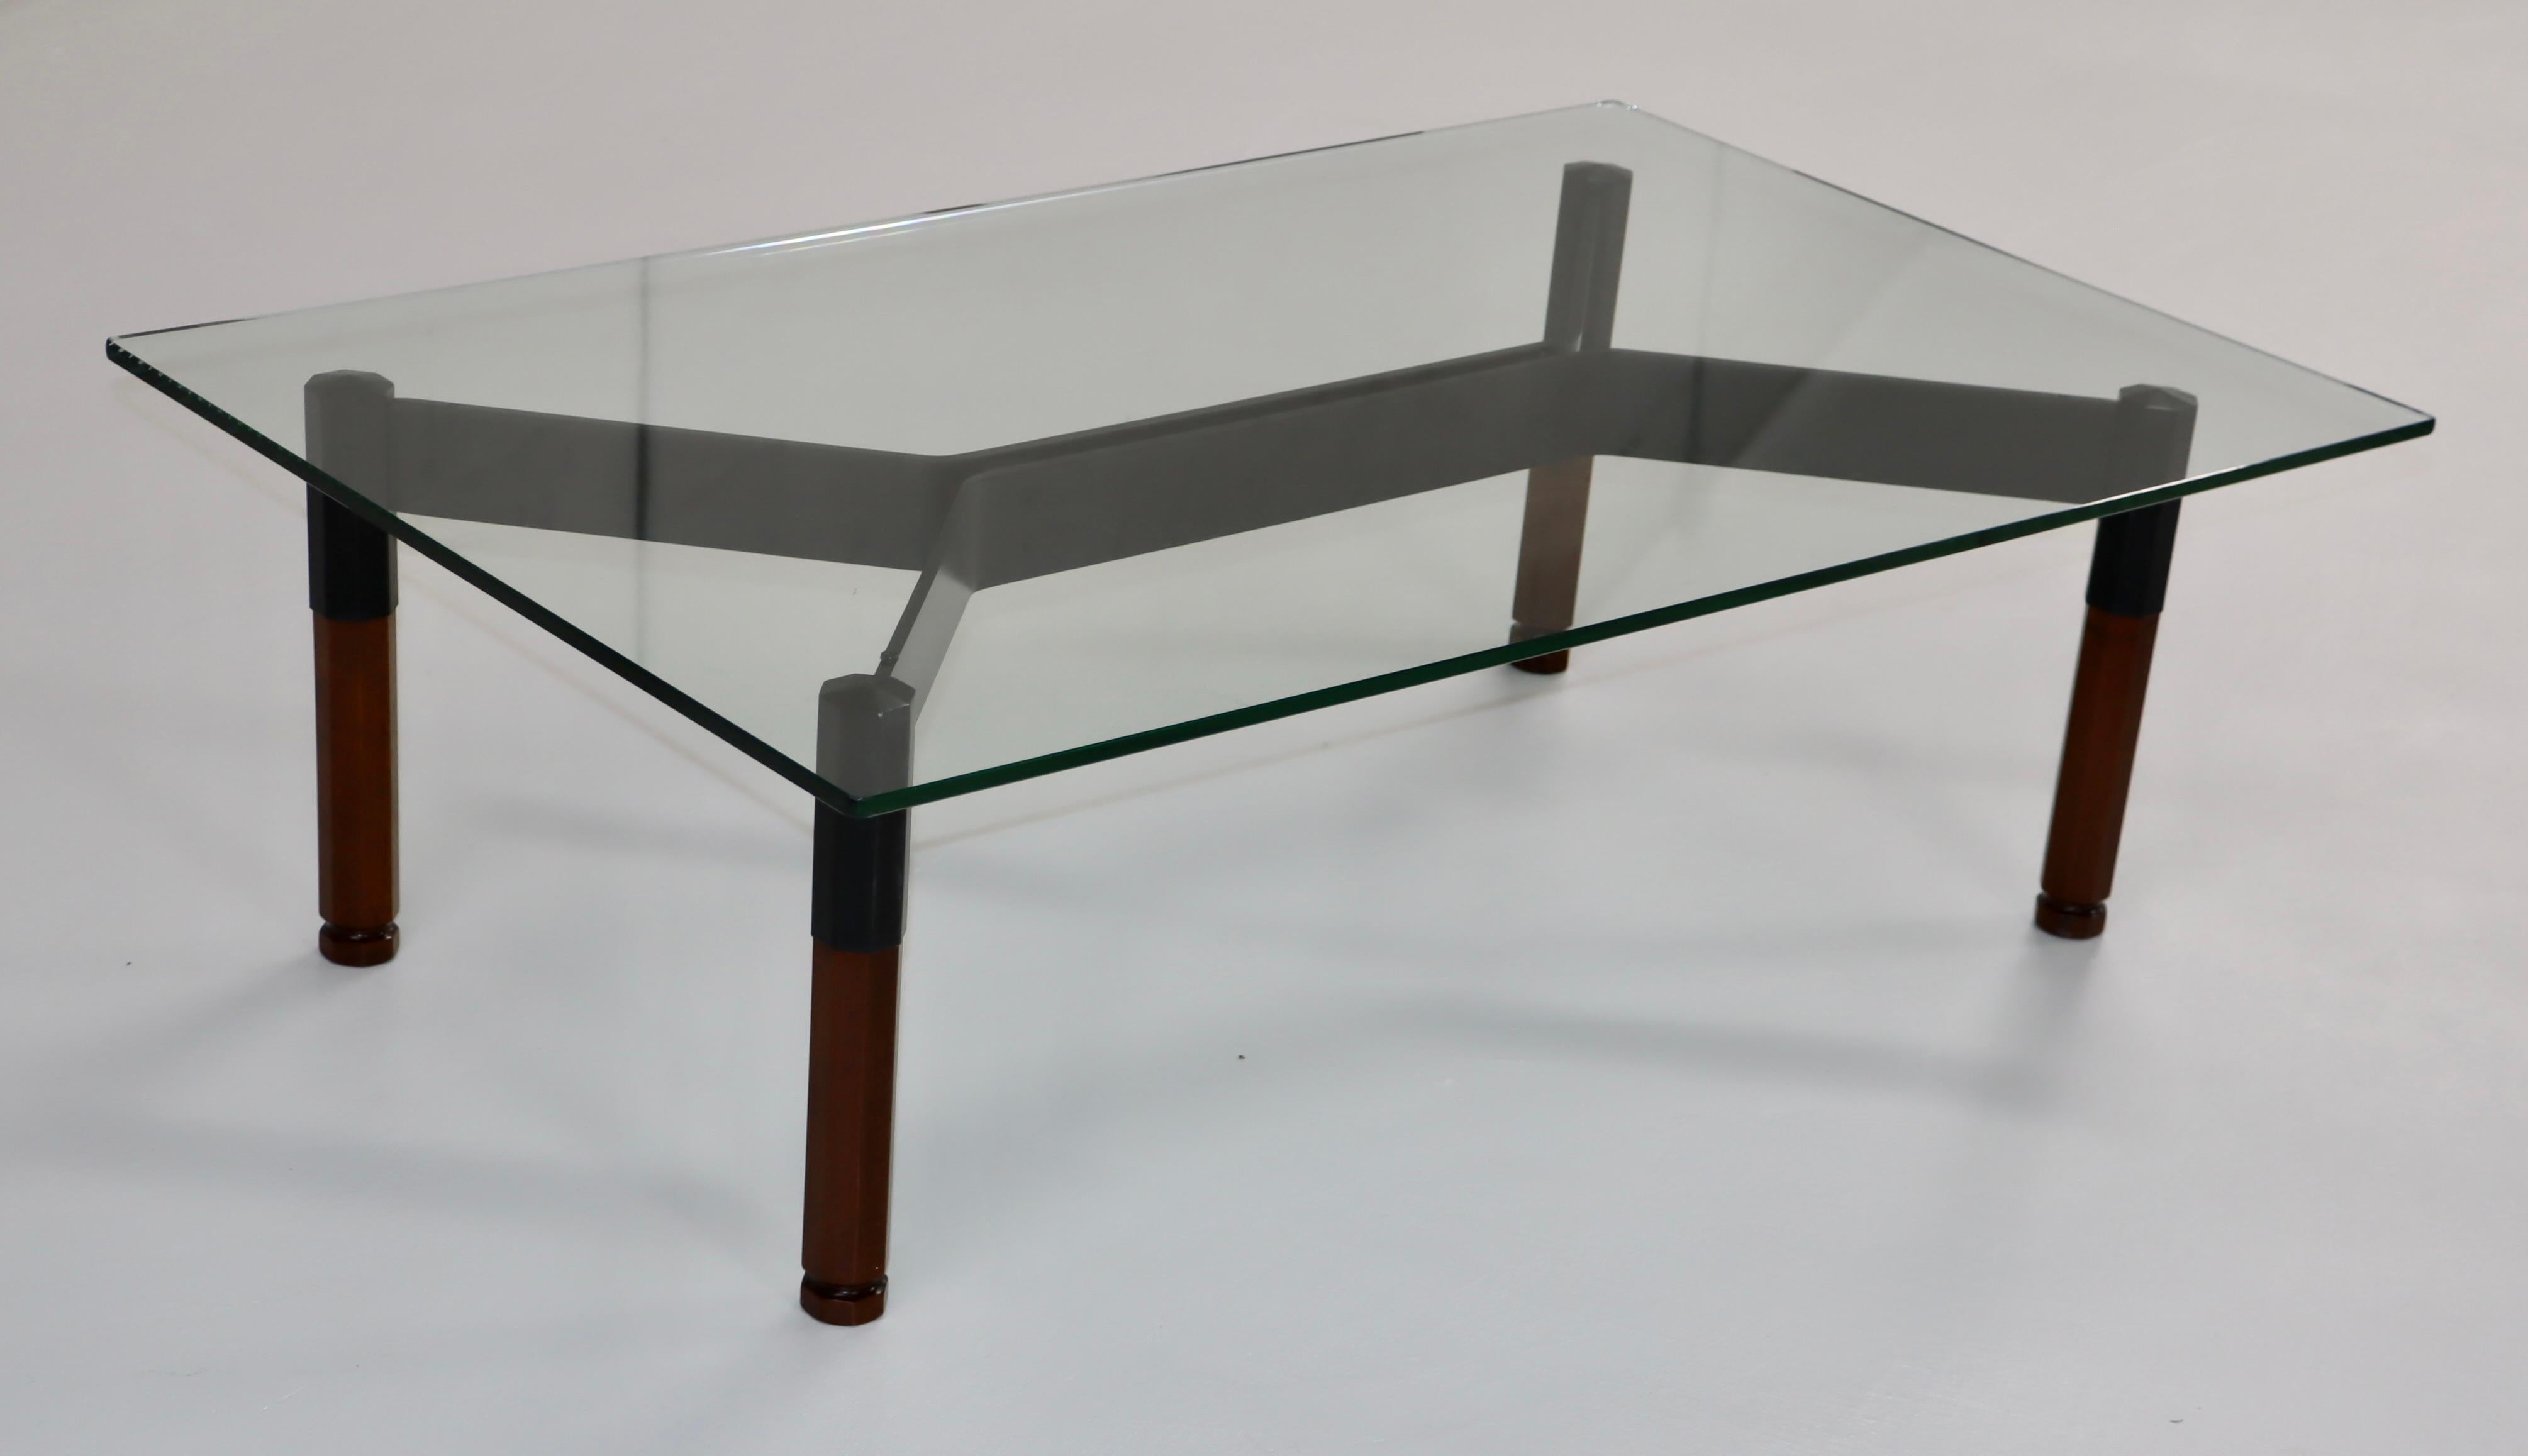 1950's solid iron and walnut base with glass top Italian coffee table by Forma Nova, fully restored with minor wear and patina due to age and use. 